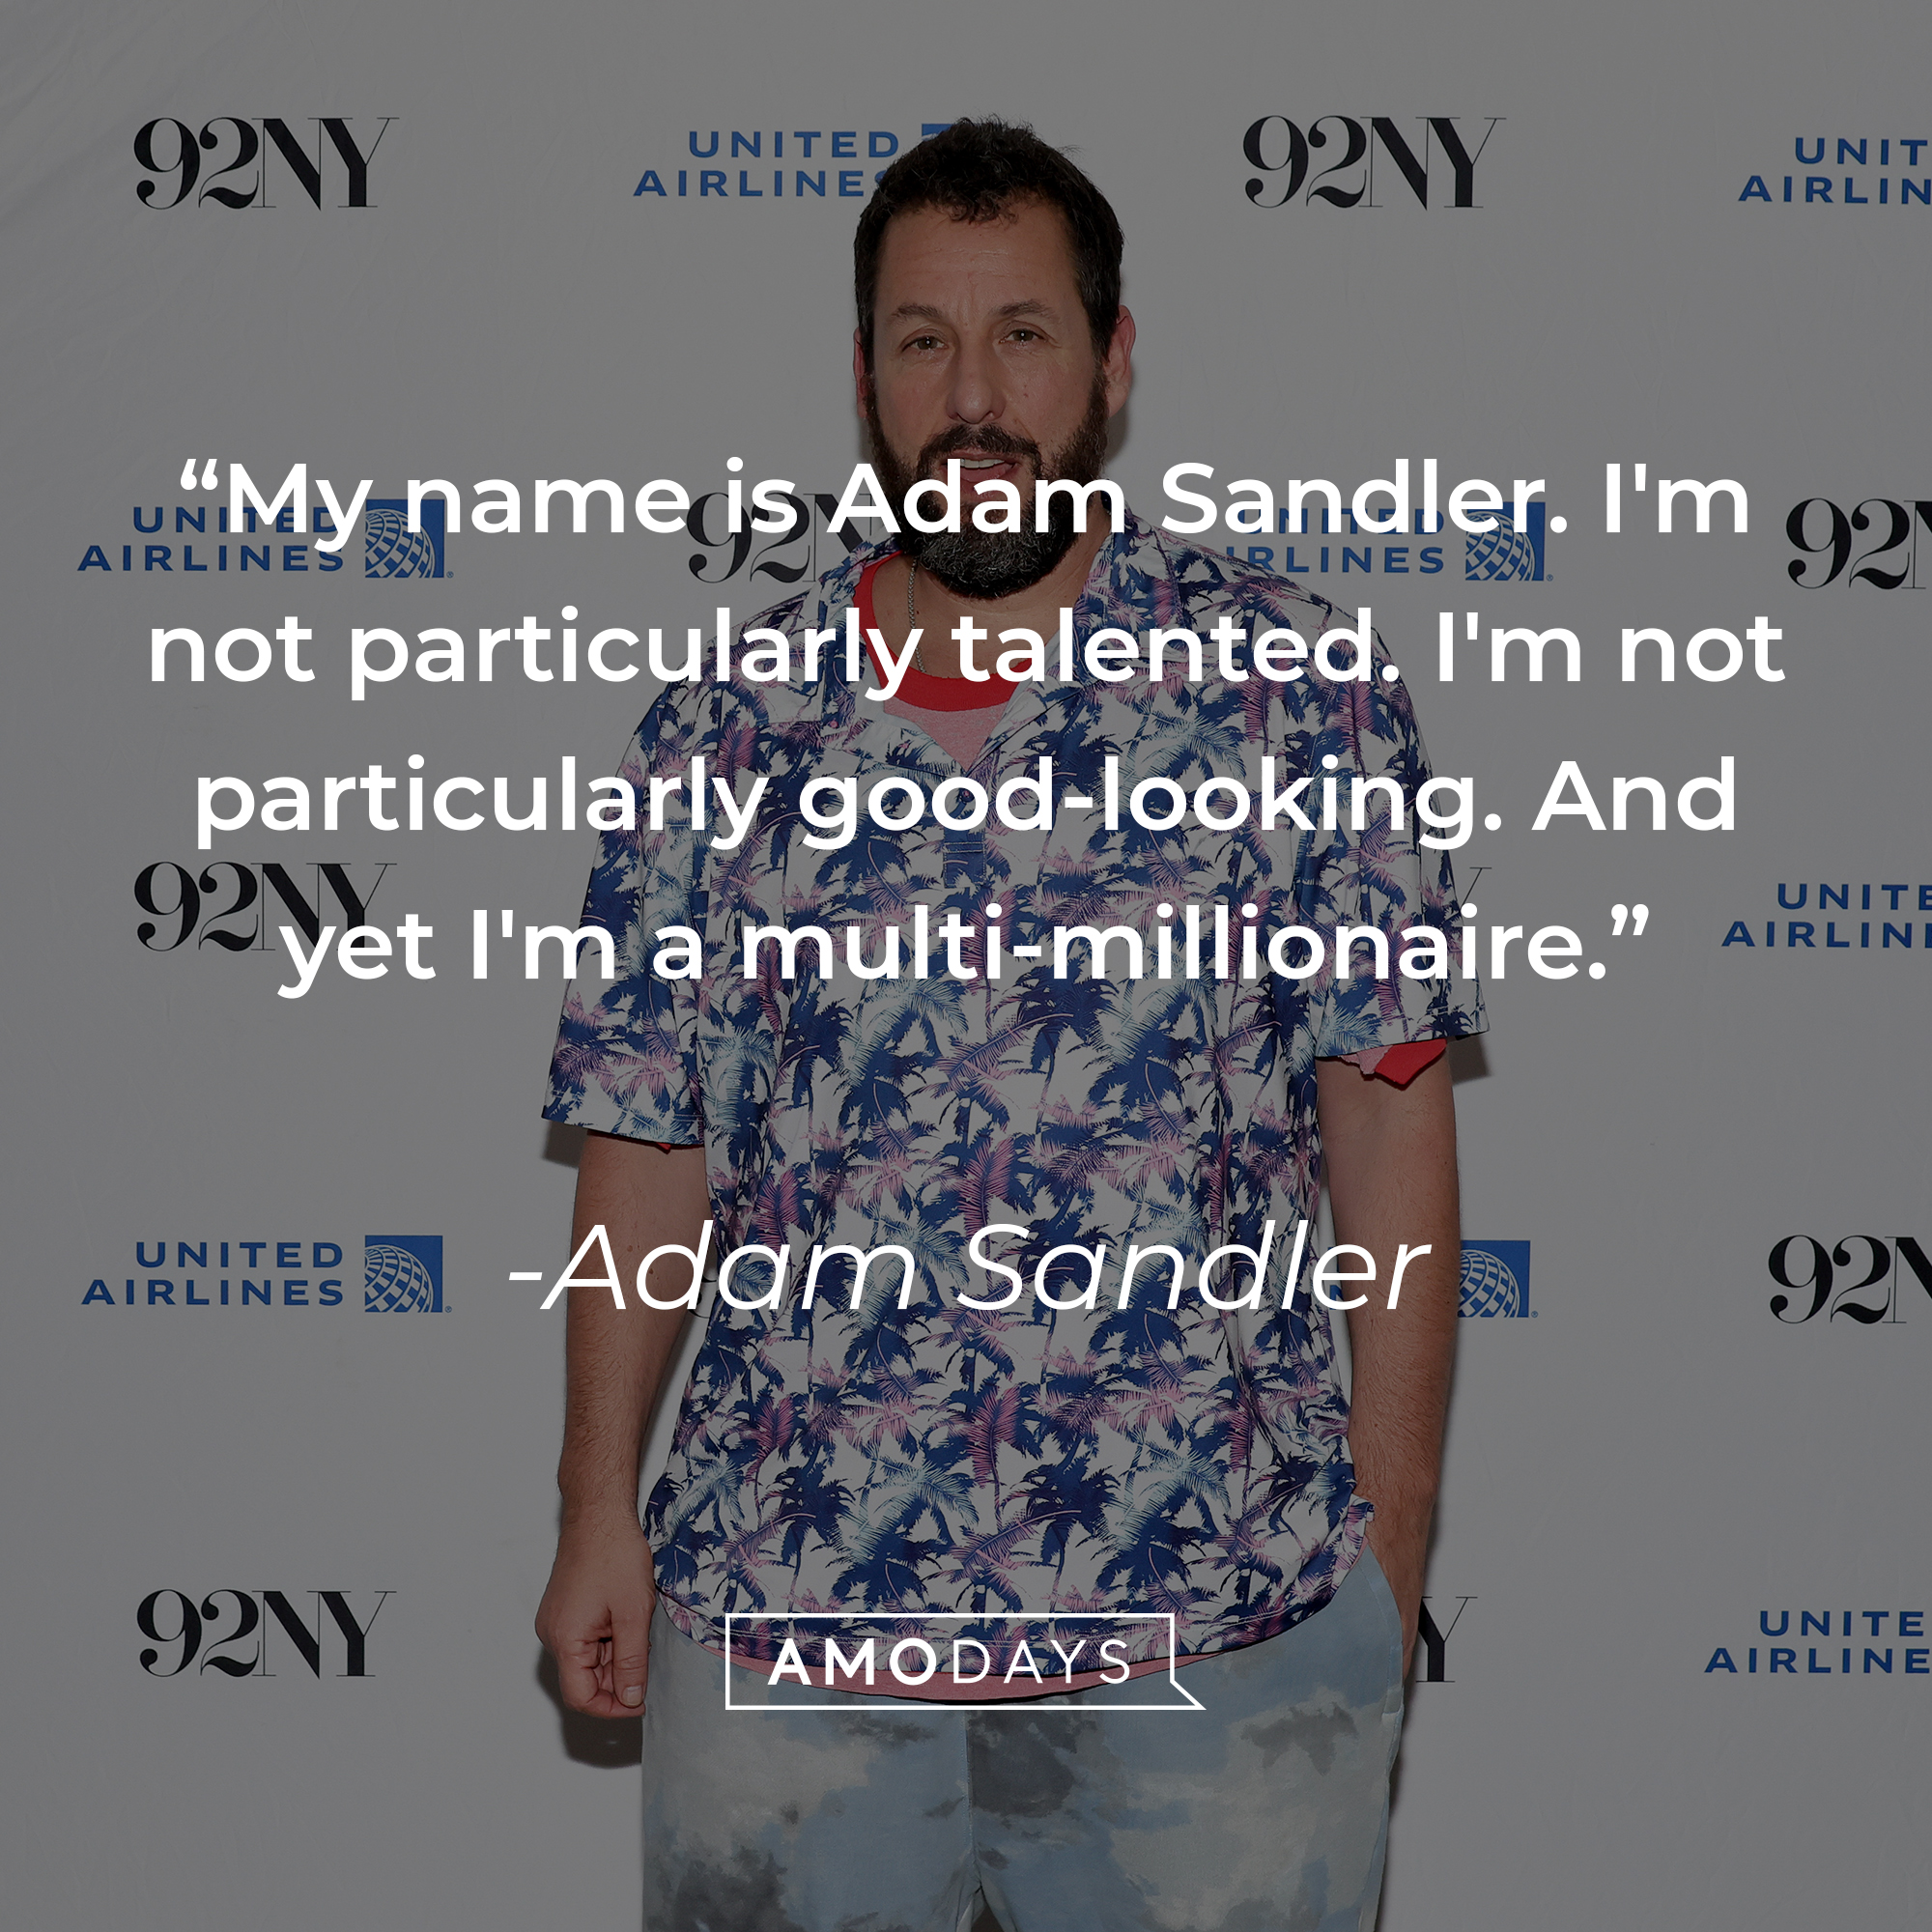 Adam Sandler's quote: "My name is Adam Sandler. I'm not particularly talented. I'm not particularly good-looking. And yet I'm a multi-millionaire." | Source: Getty Images